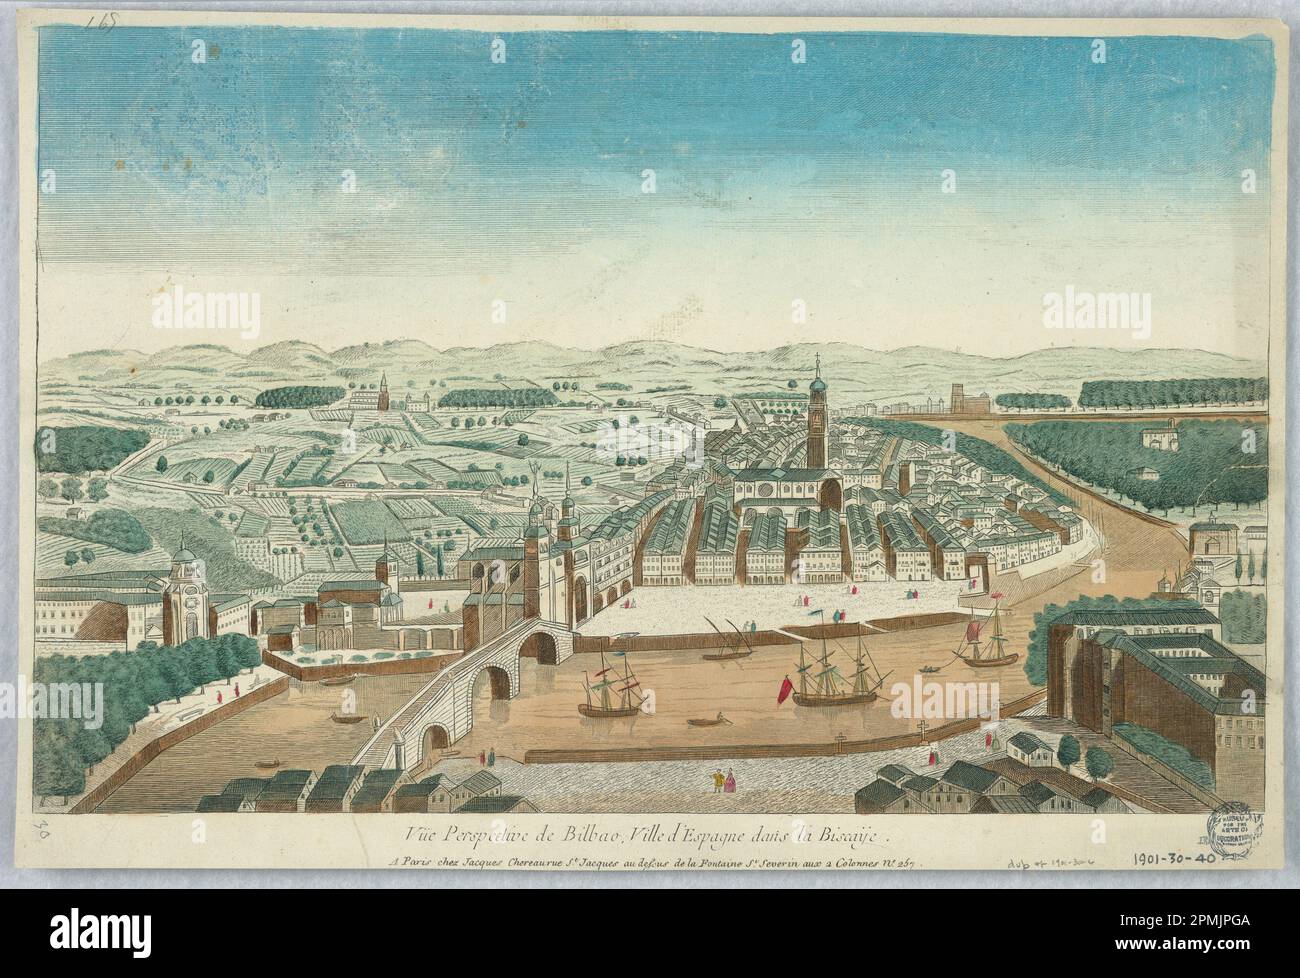 Print, Peep-show, Vuë Perspective de Bilbao, Ville d'Espagne dans la Biscaye; France; engraving in ink with washes of watercolor on paper, mounted on scrapbook page; 28.4 × 41.9 cm (11 3/16 × 16 1/2 in.) Stock Photo